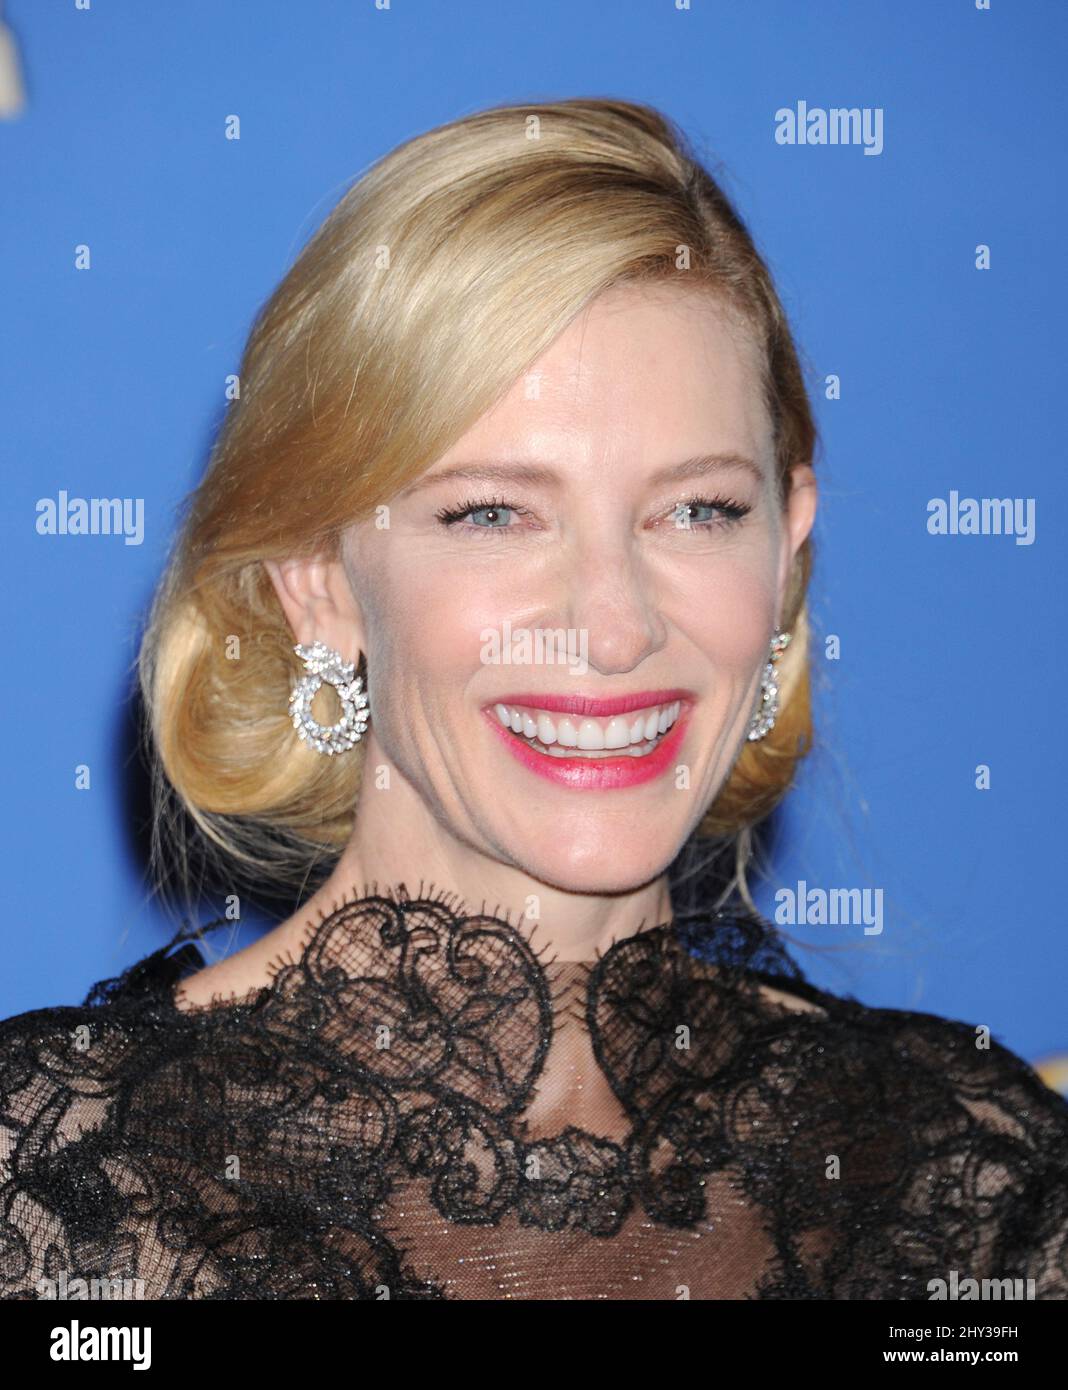 Actress CATE BLANCHETT Nominated for Best Actress In a Leading Role for ' Blue Jasmine.' - Academy Awards 2014. PICTURED: July 30, 2013 - New York,  New York, U.S. - Actress CATE BLANCHETT